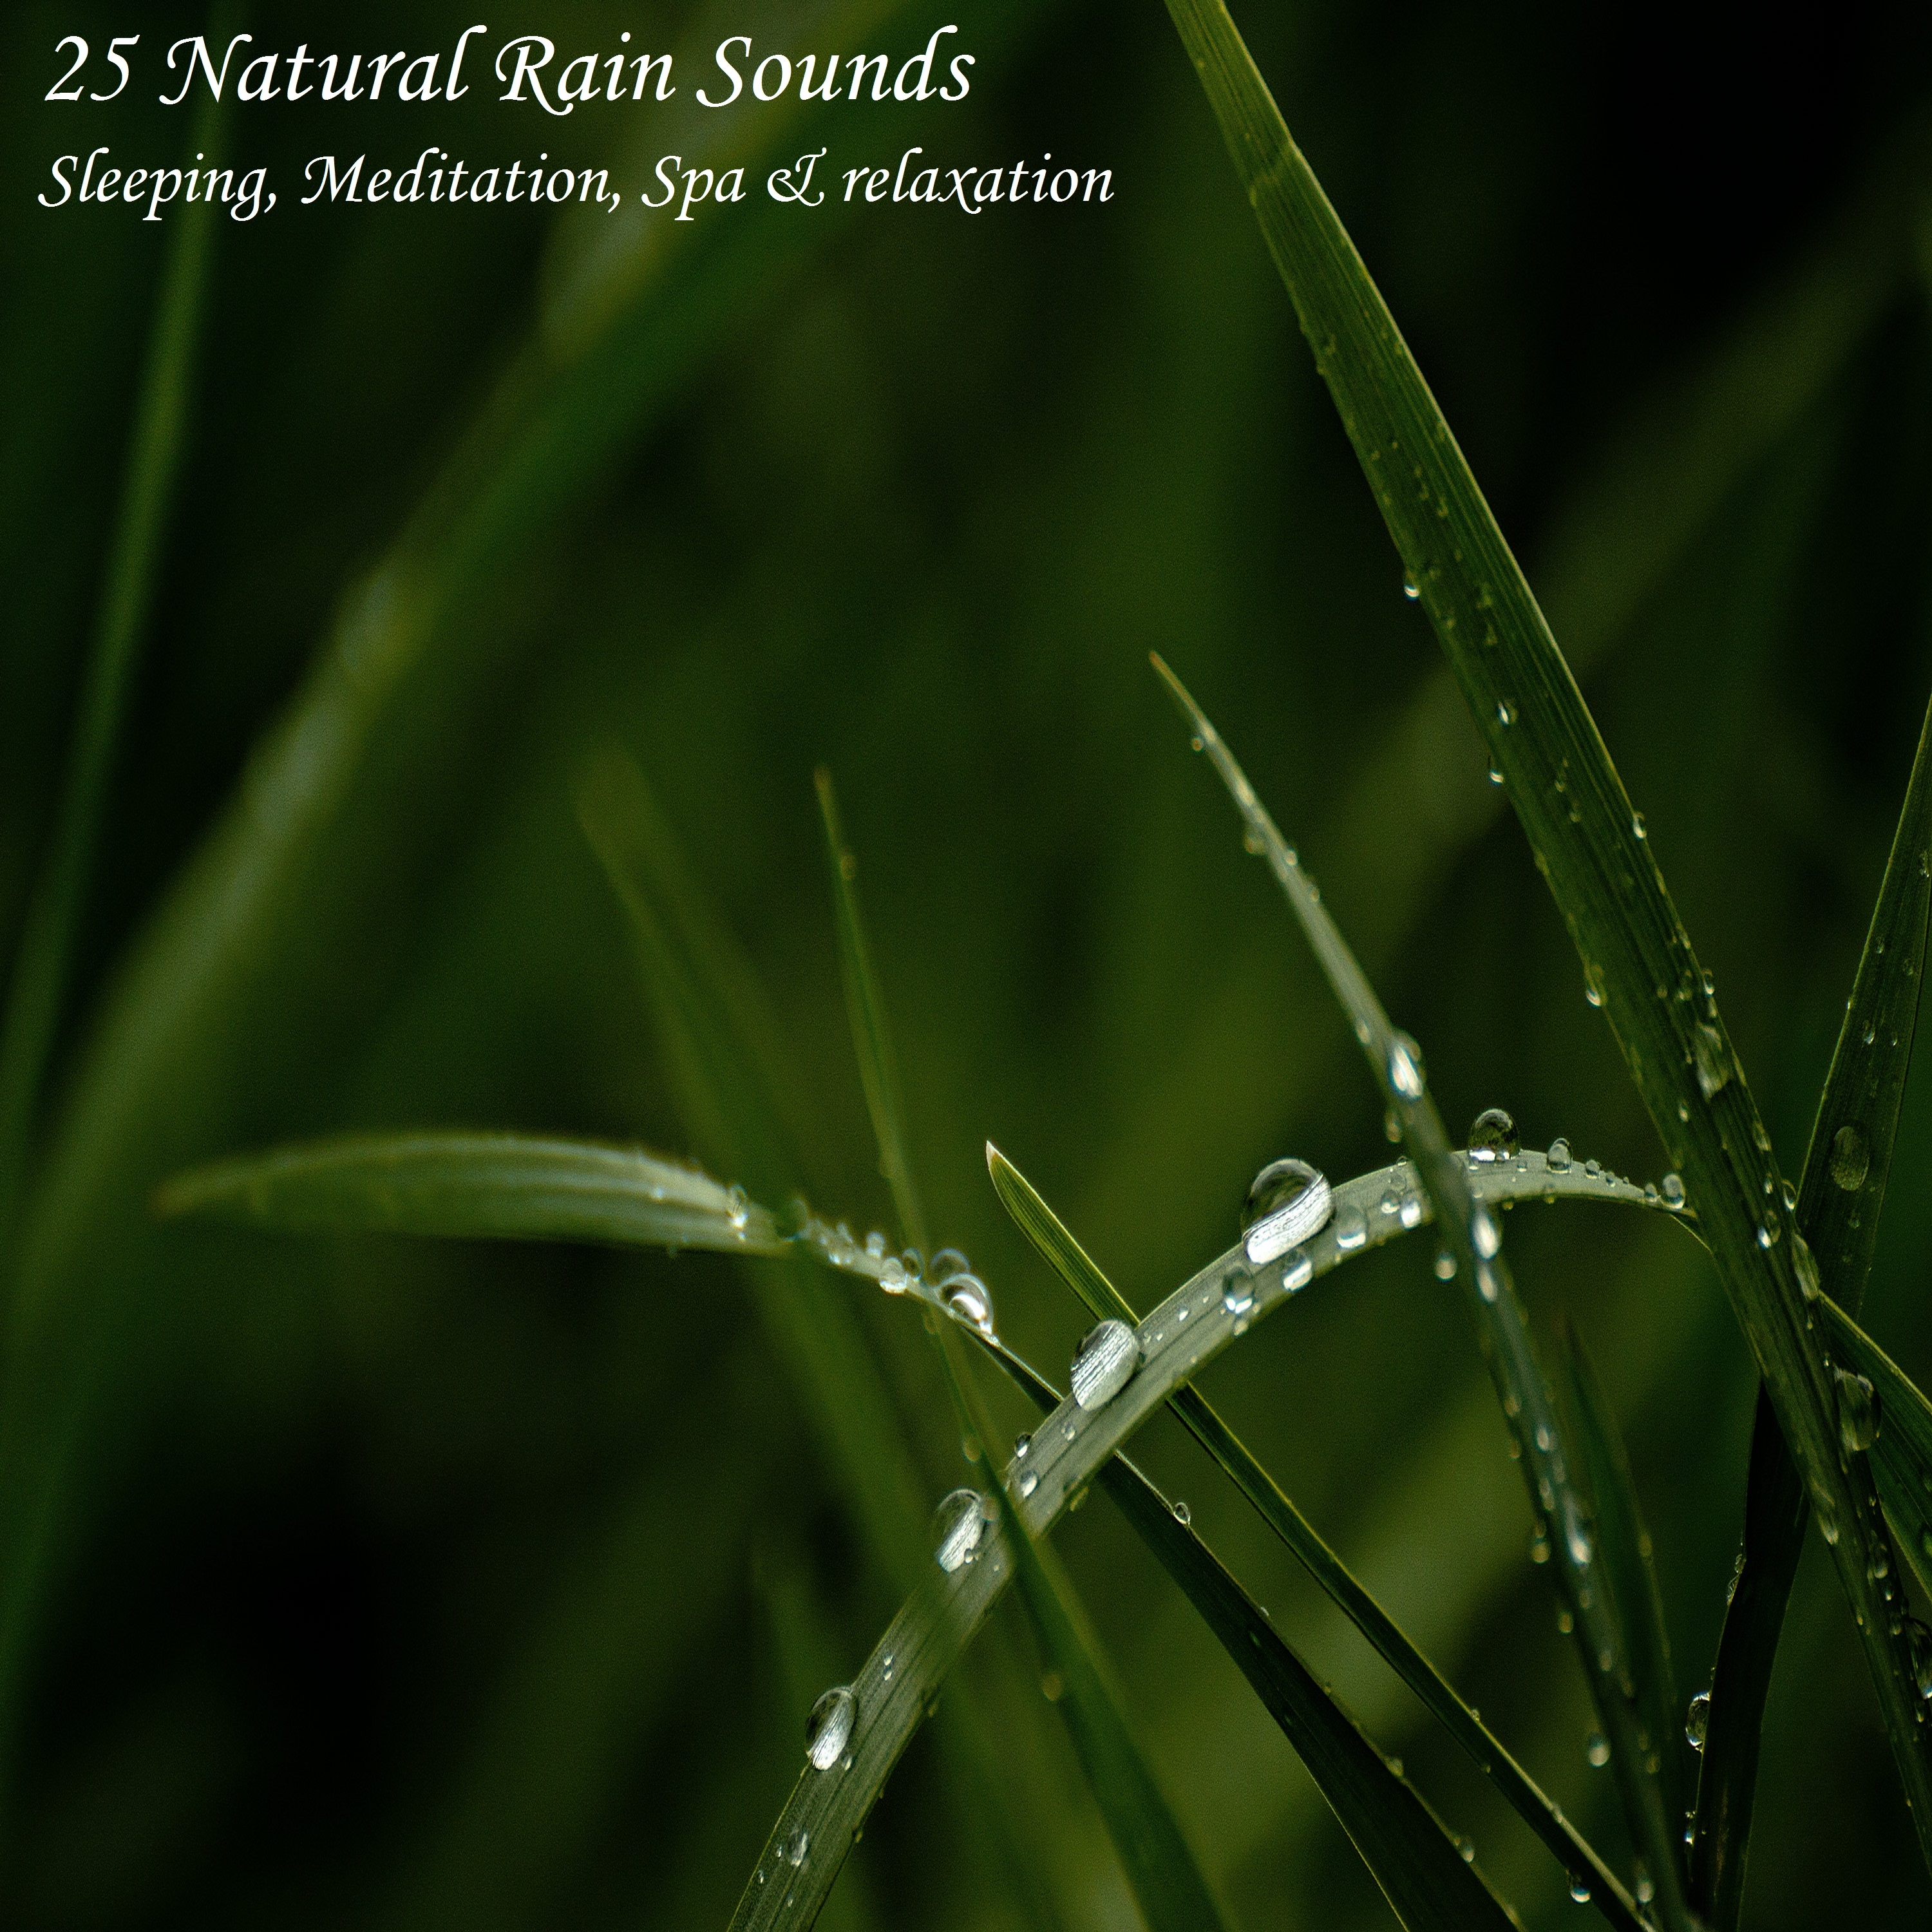 25 Natural Rain Sounds for Sleeping, Meditation, Spa & relaxation